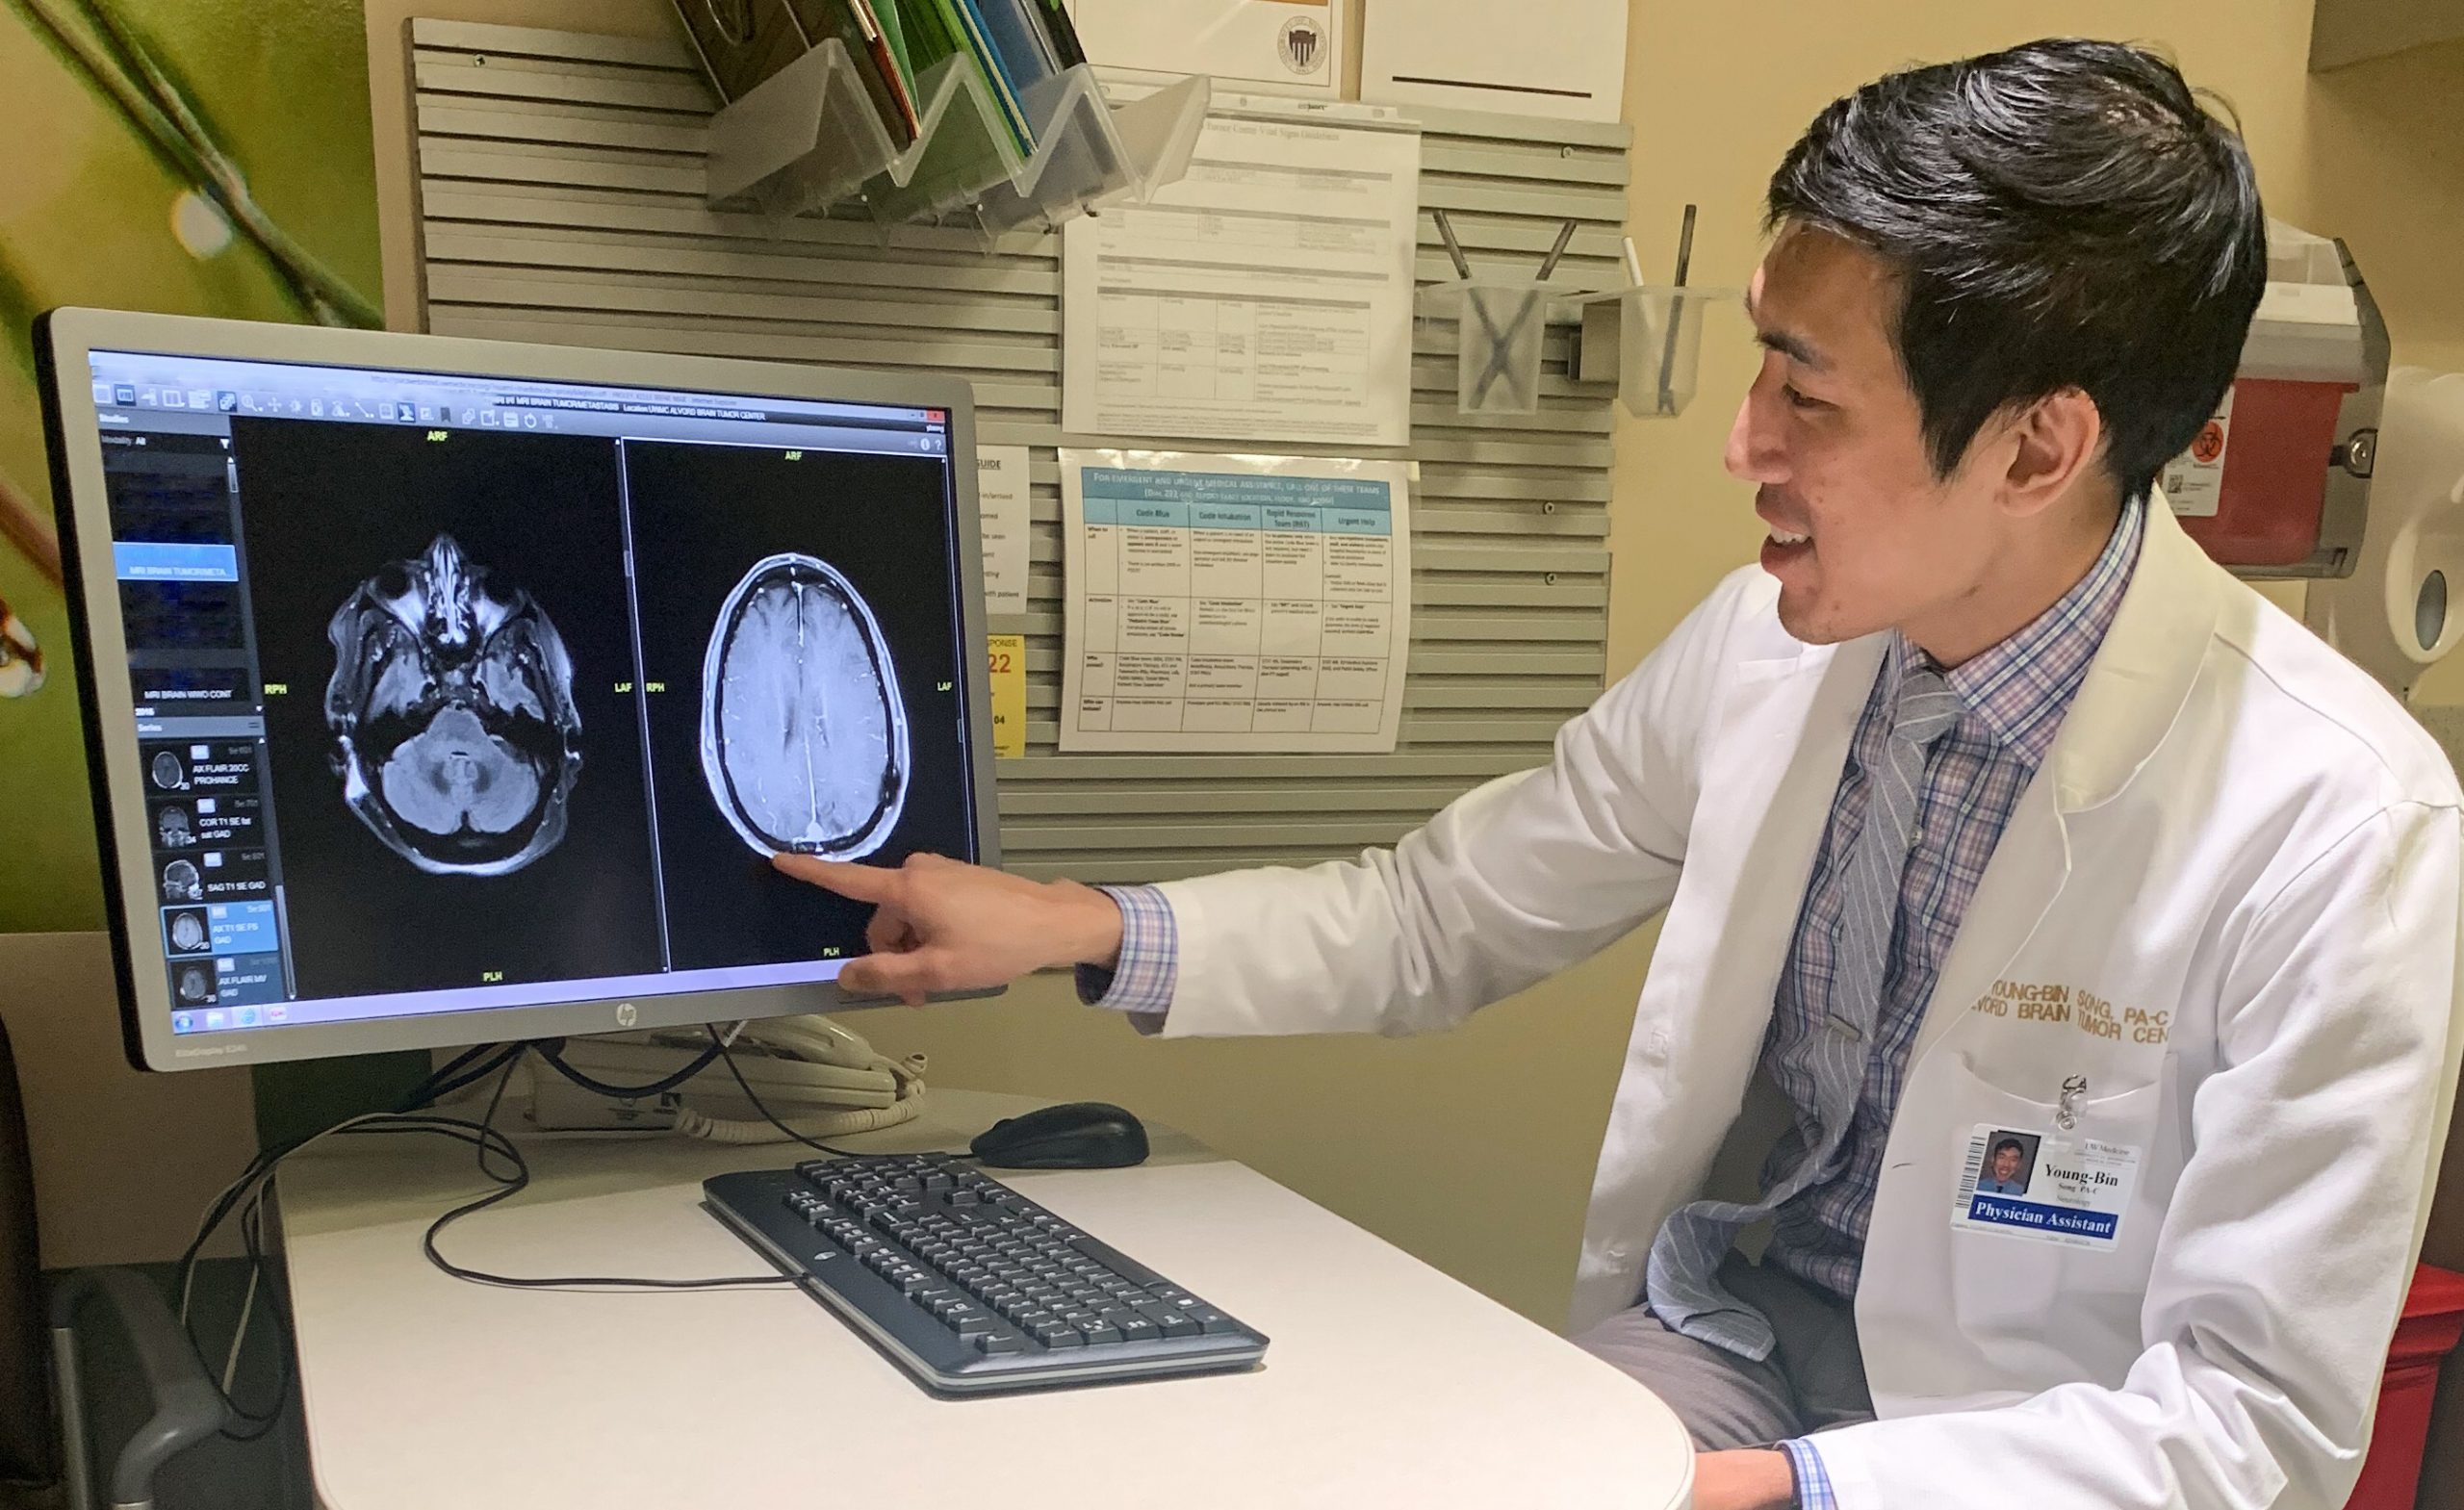 Young-Bin Song pointing to an MRI scan